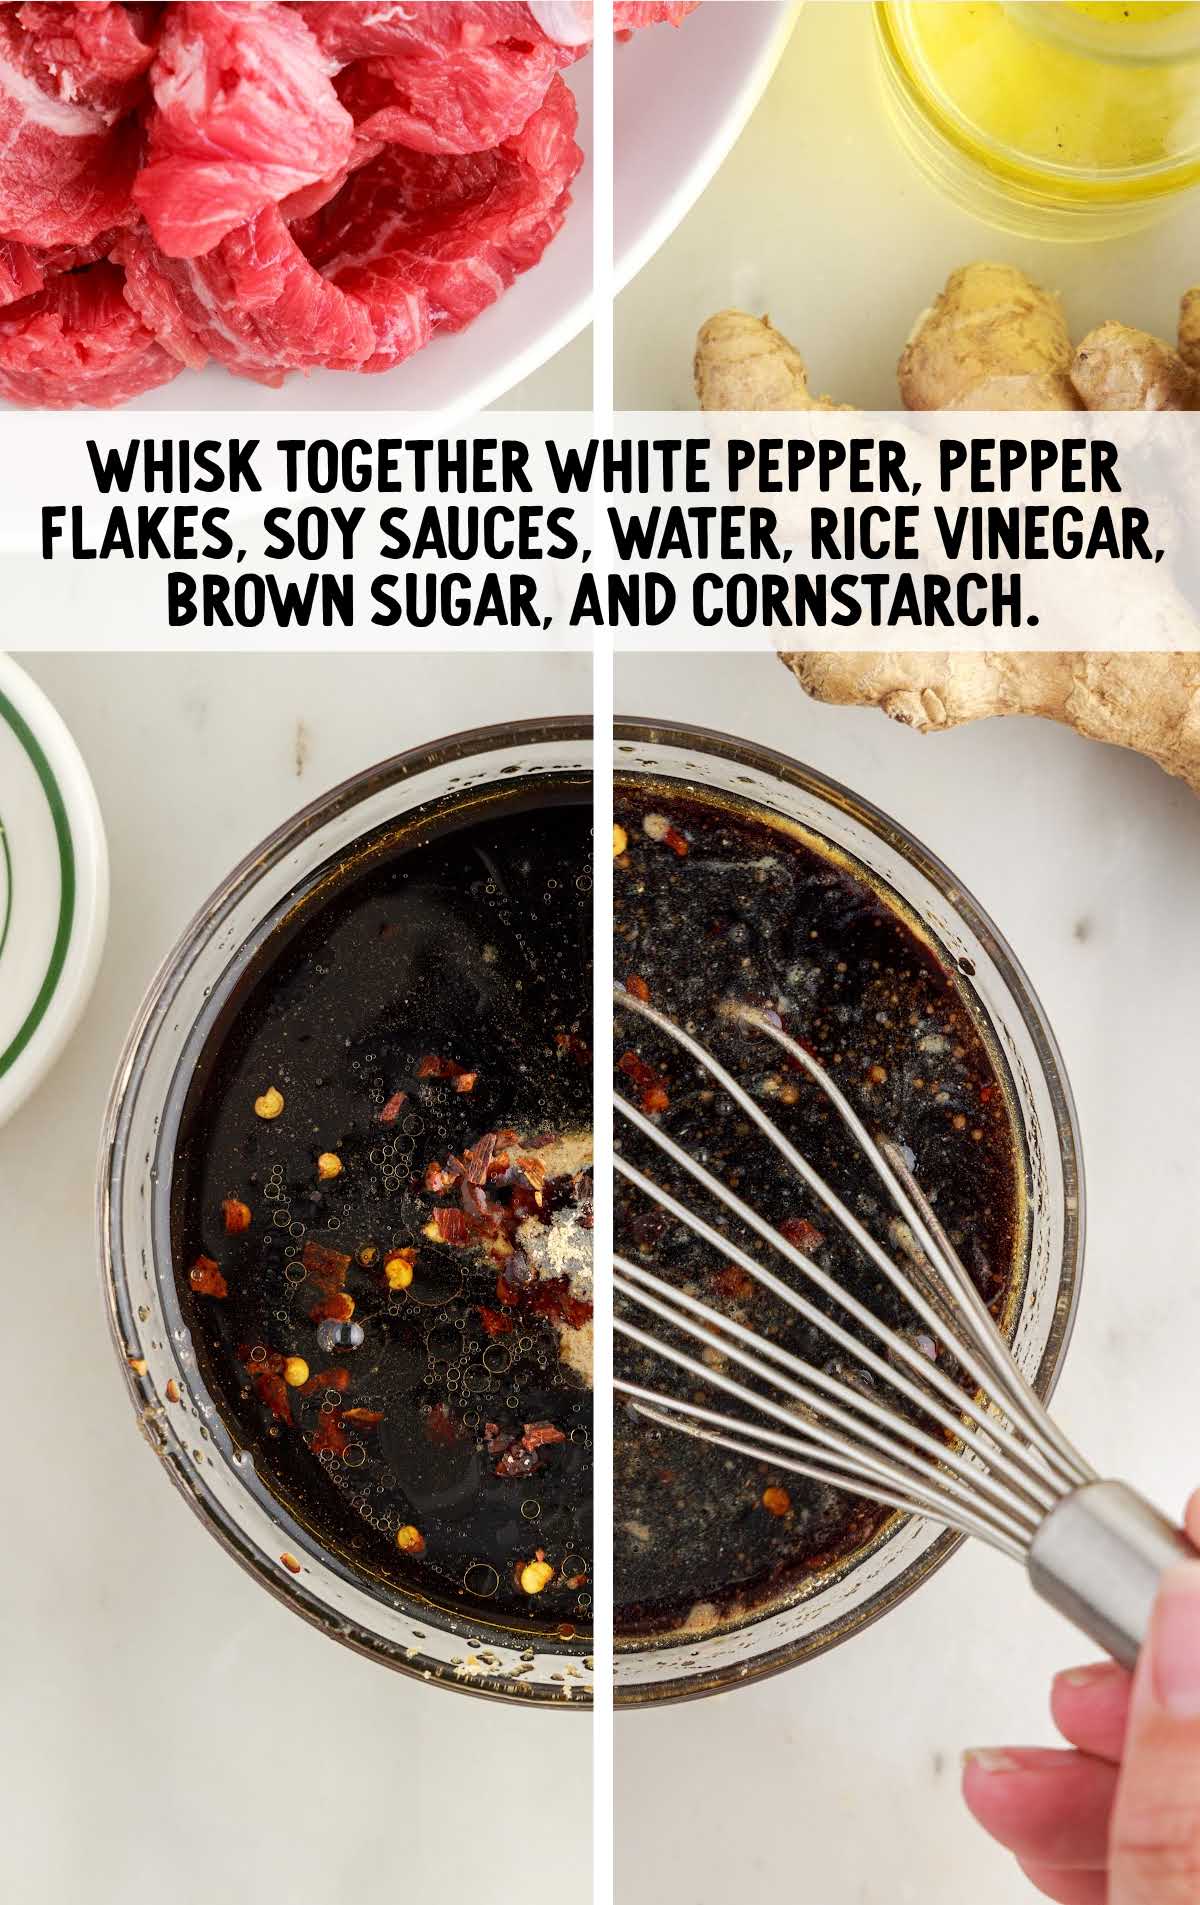 white pepper, pepper flakes, soy sauce, water, rice, vinegar, brown sugar, and cornstarch whisked together